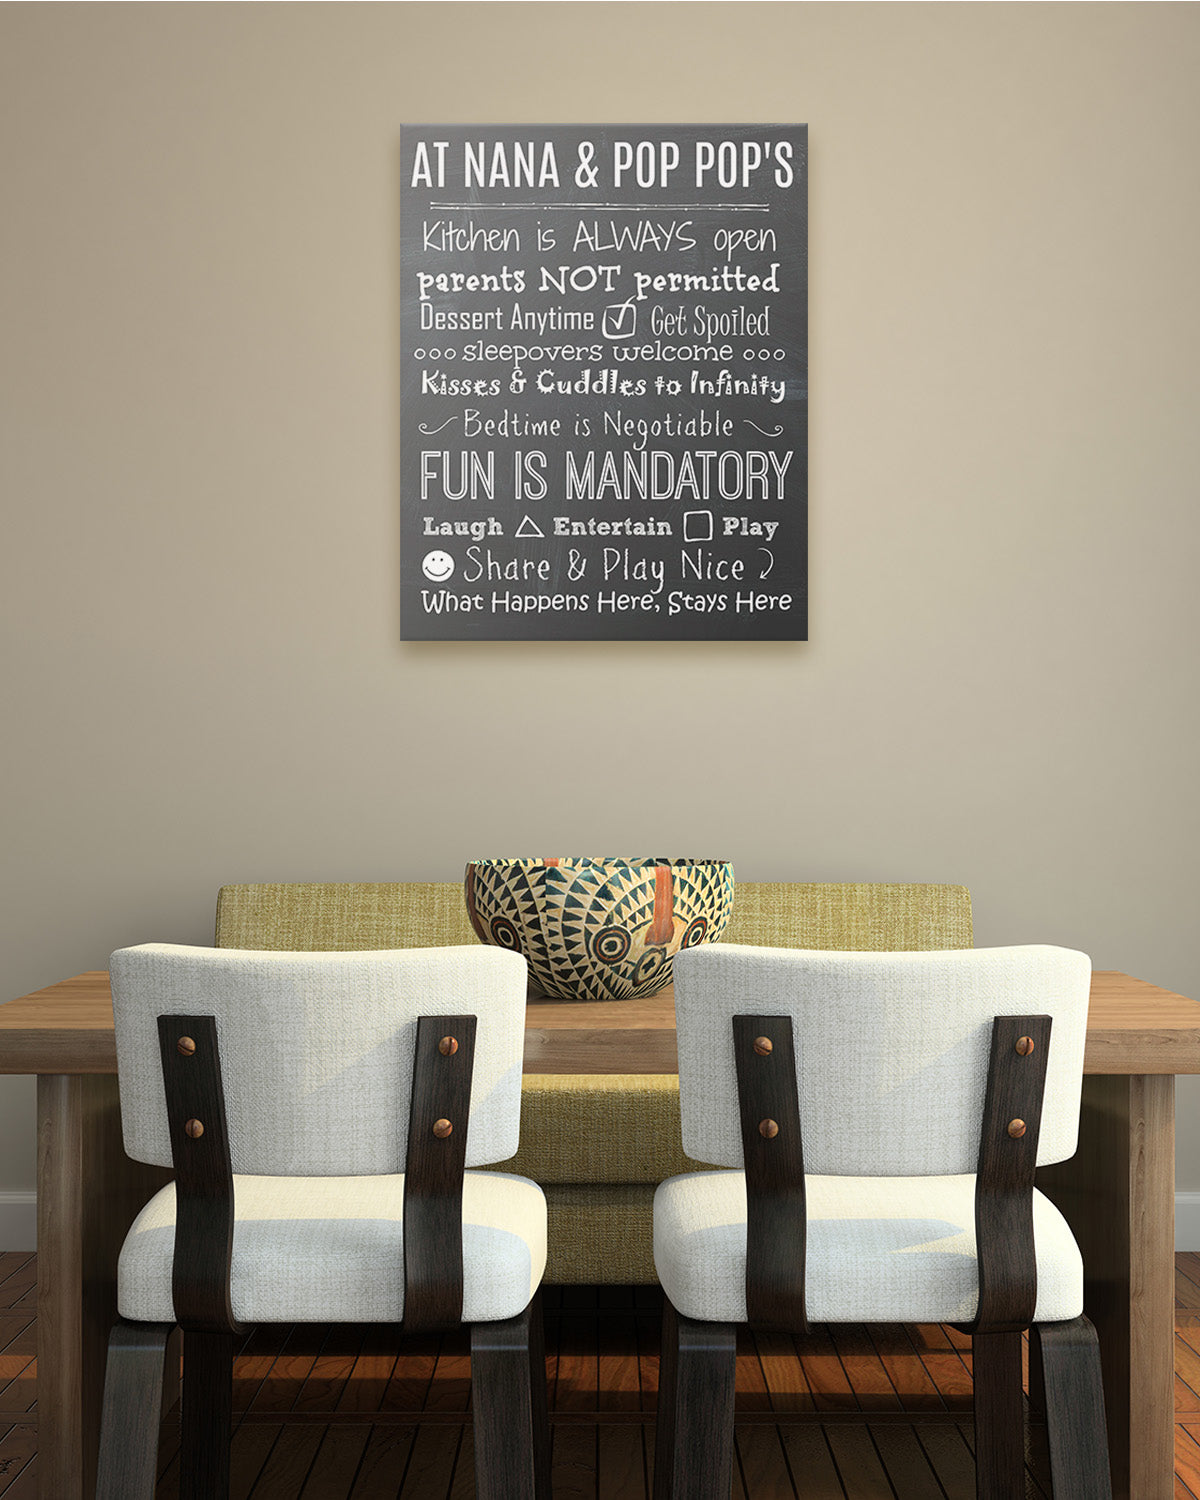 Grandparents House Rules Sign Wall Art - Gifts for Grandparents - Grandparents Day Gift Ideas - Best Gifts for Grandparents Wall Decor